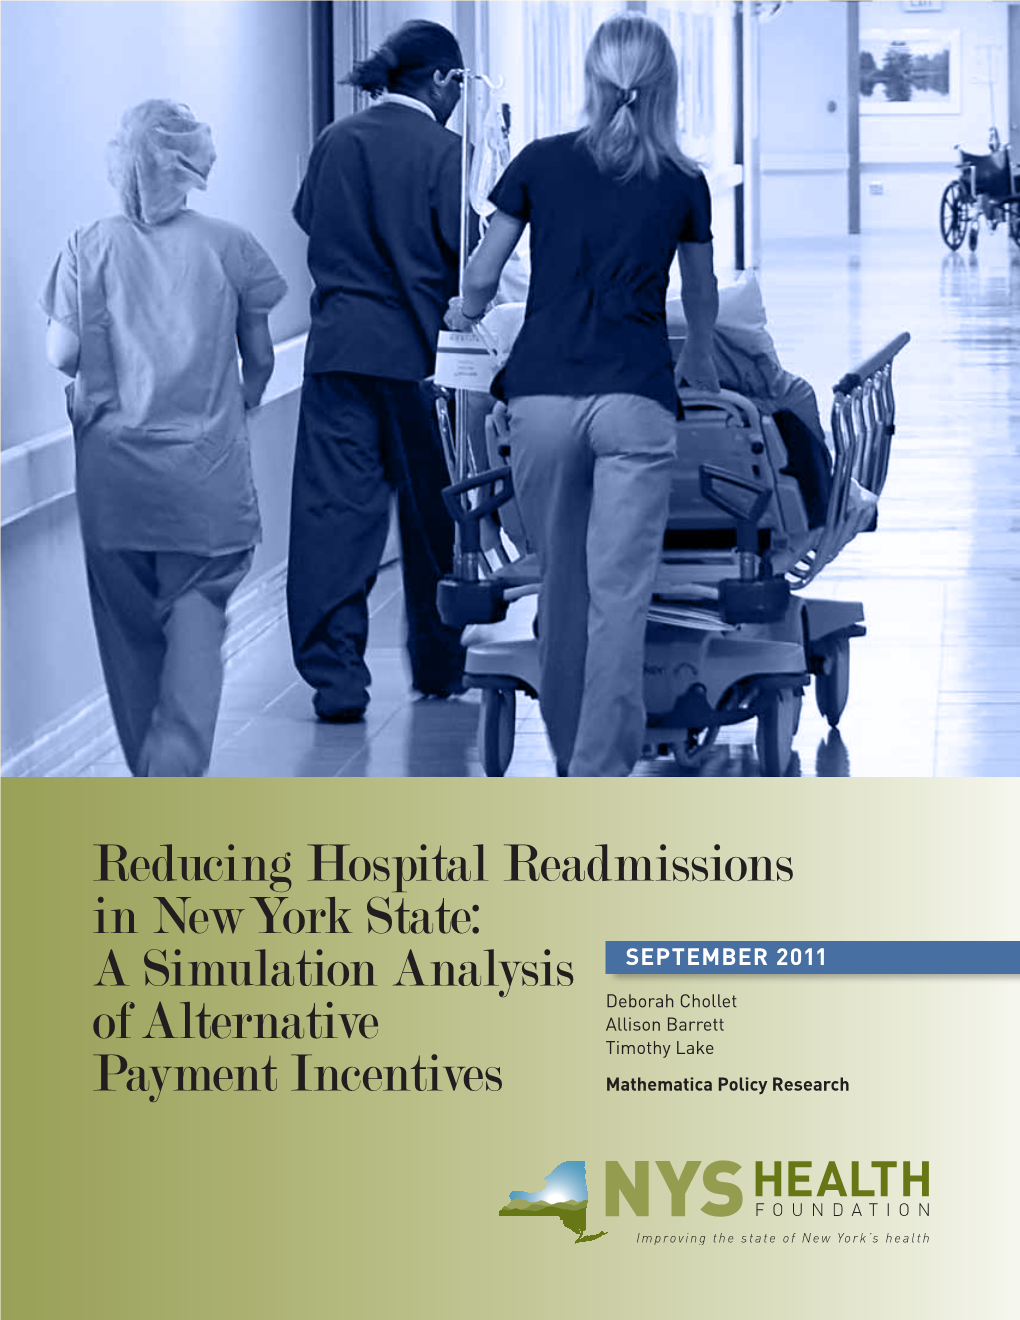 Reducing Hospital Readmissions in New York State: a Simulation